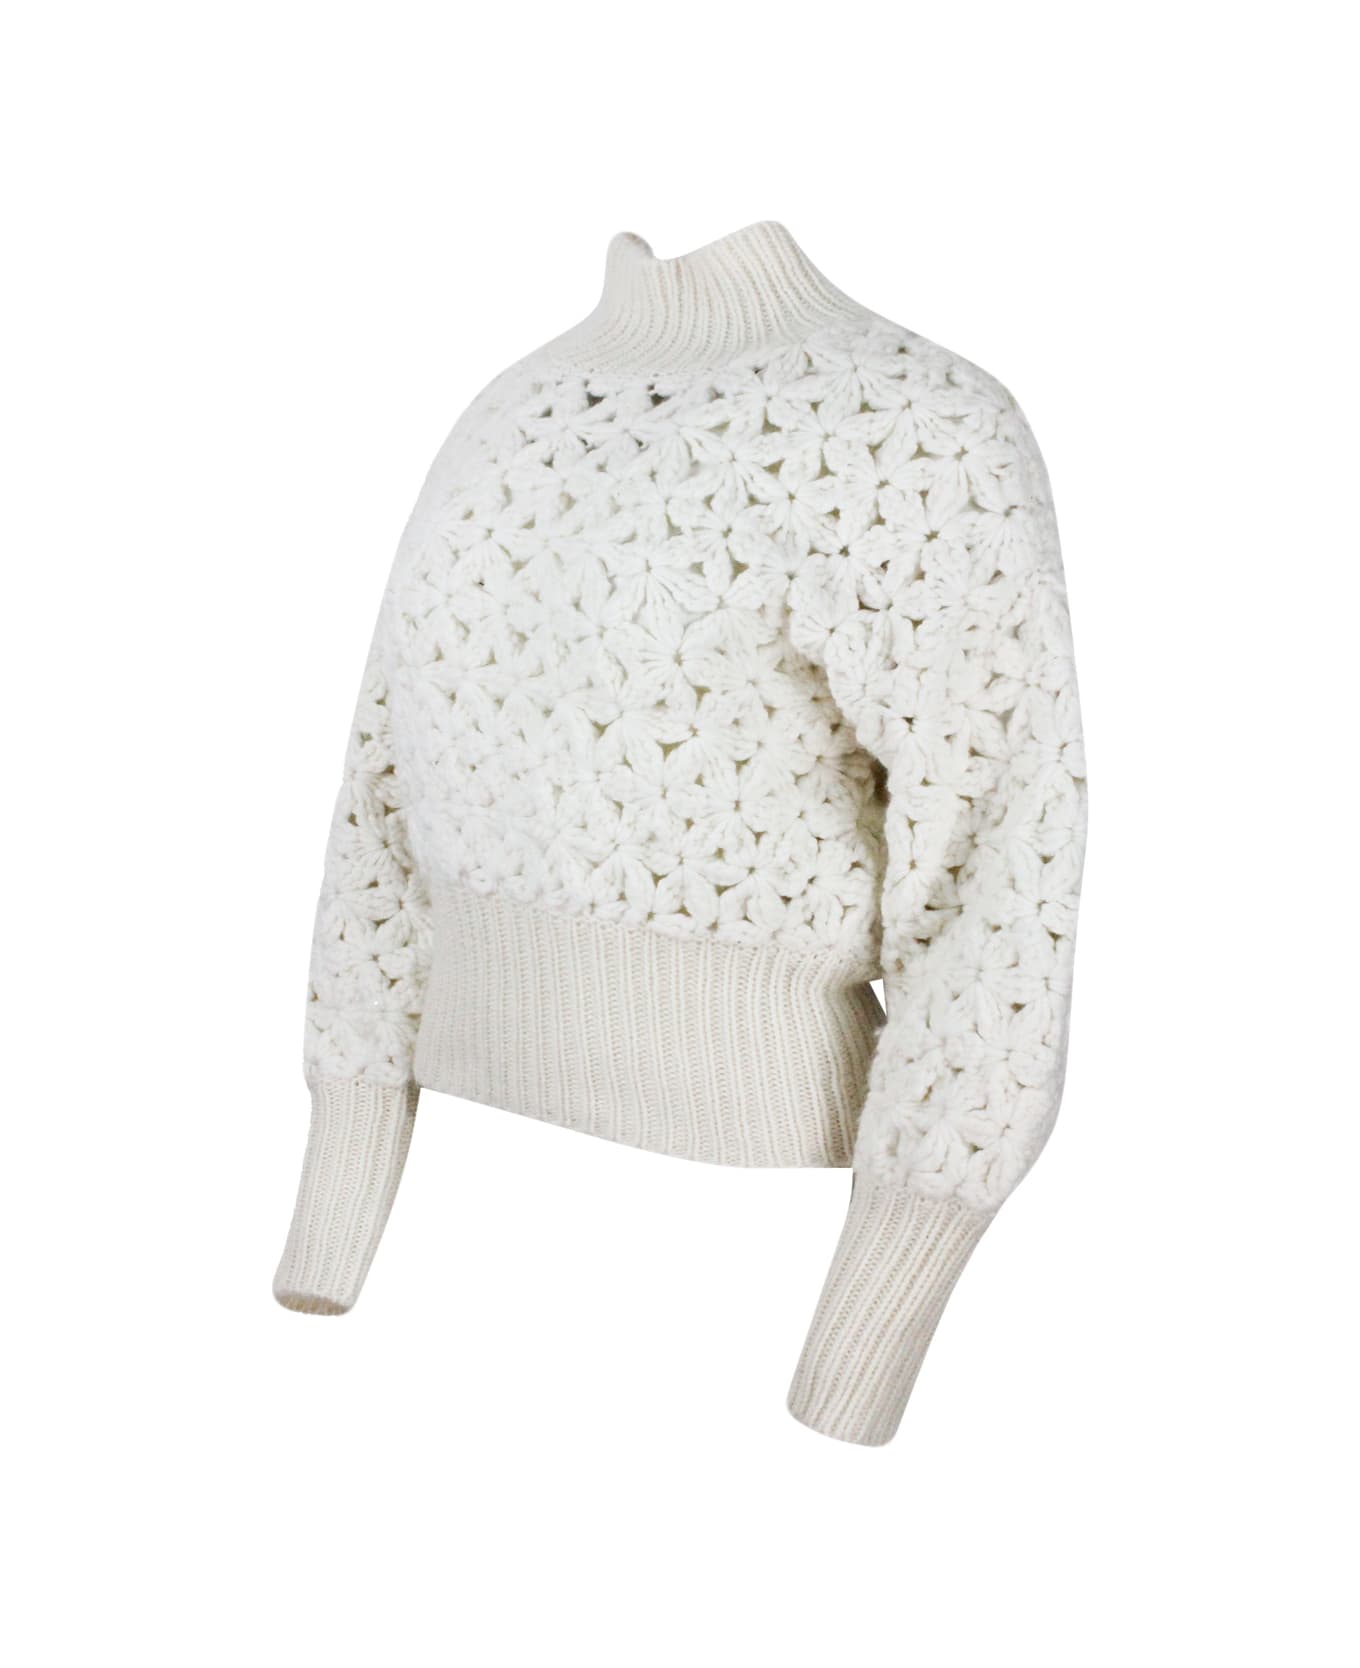 Fabiana Filippi Long-sleeved High-neck Sweater In Soft And Precious Wool, Silk And Cashmere With Flower Processing And Hand-made And Embellished With Micro-sequins - White ニットウェア